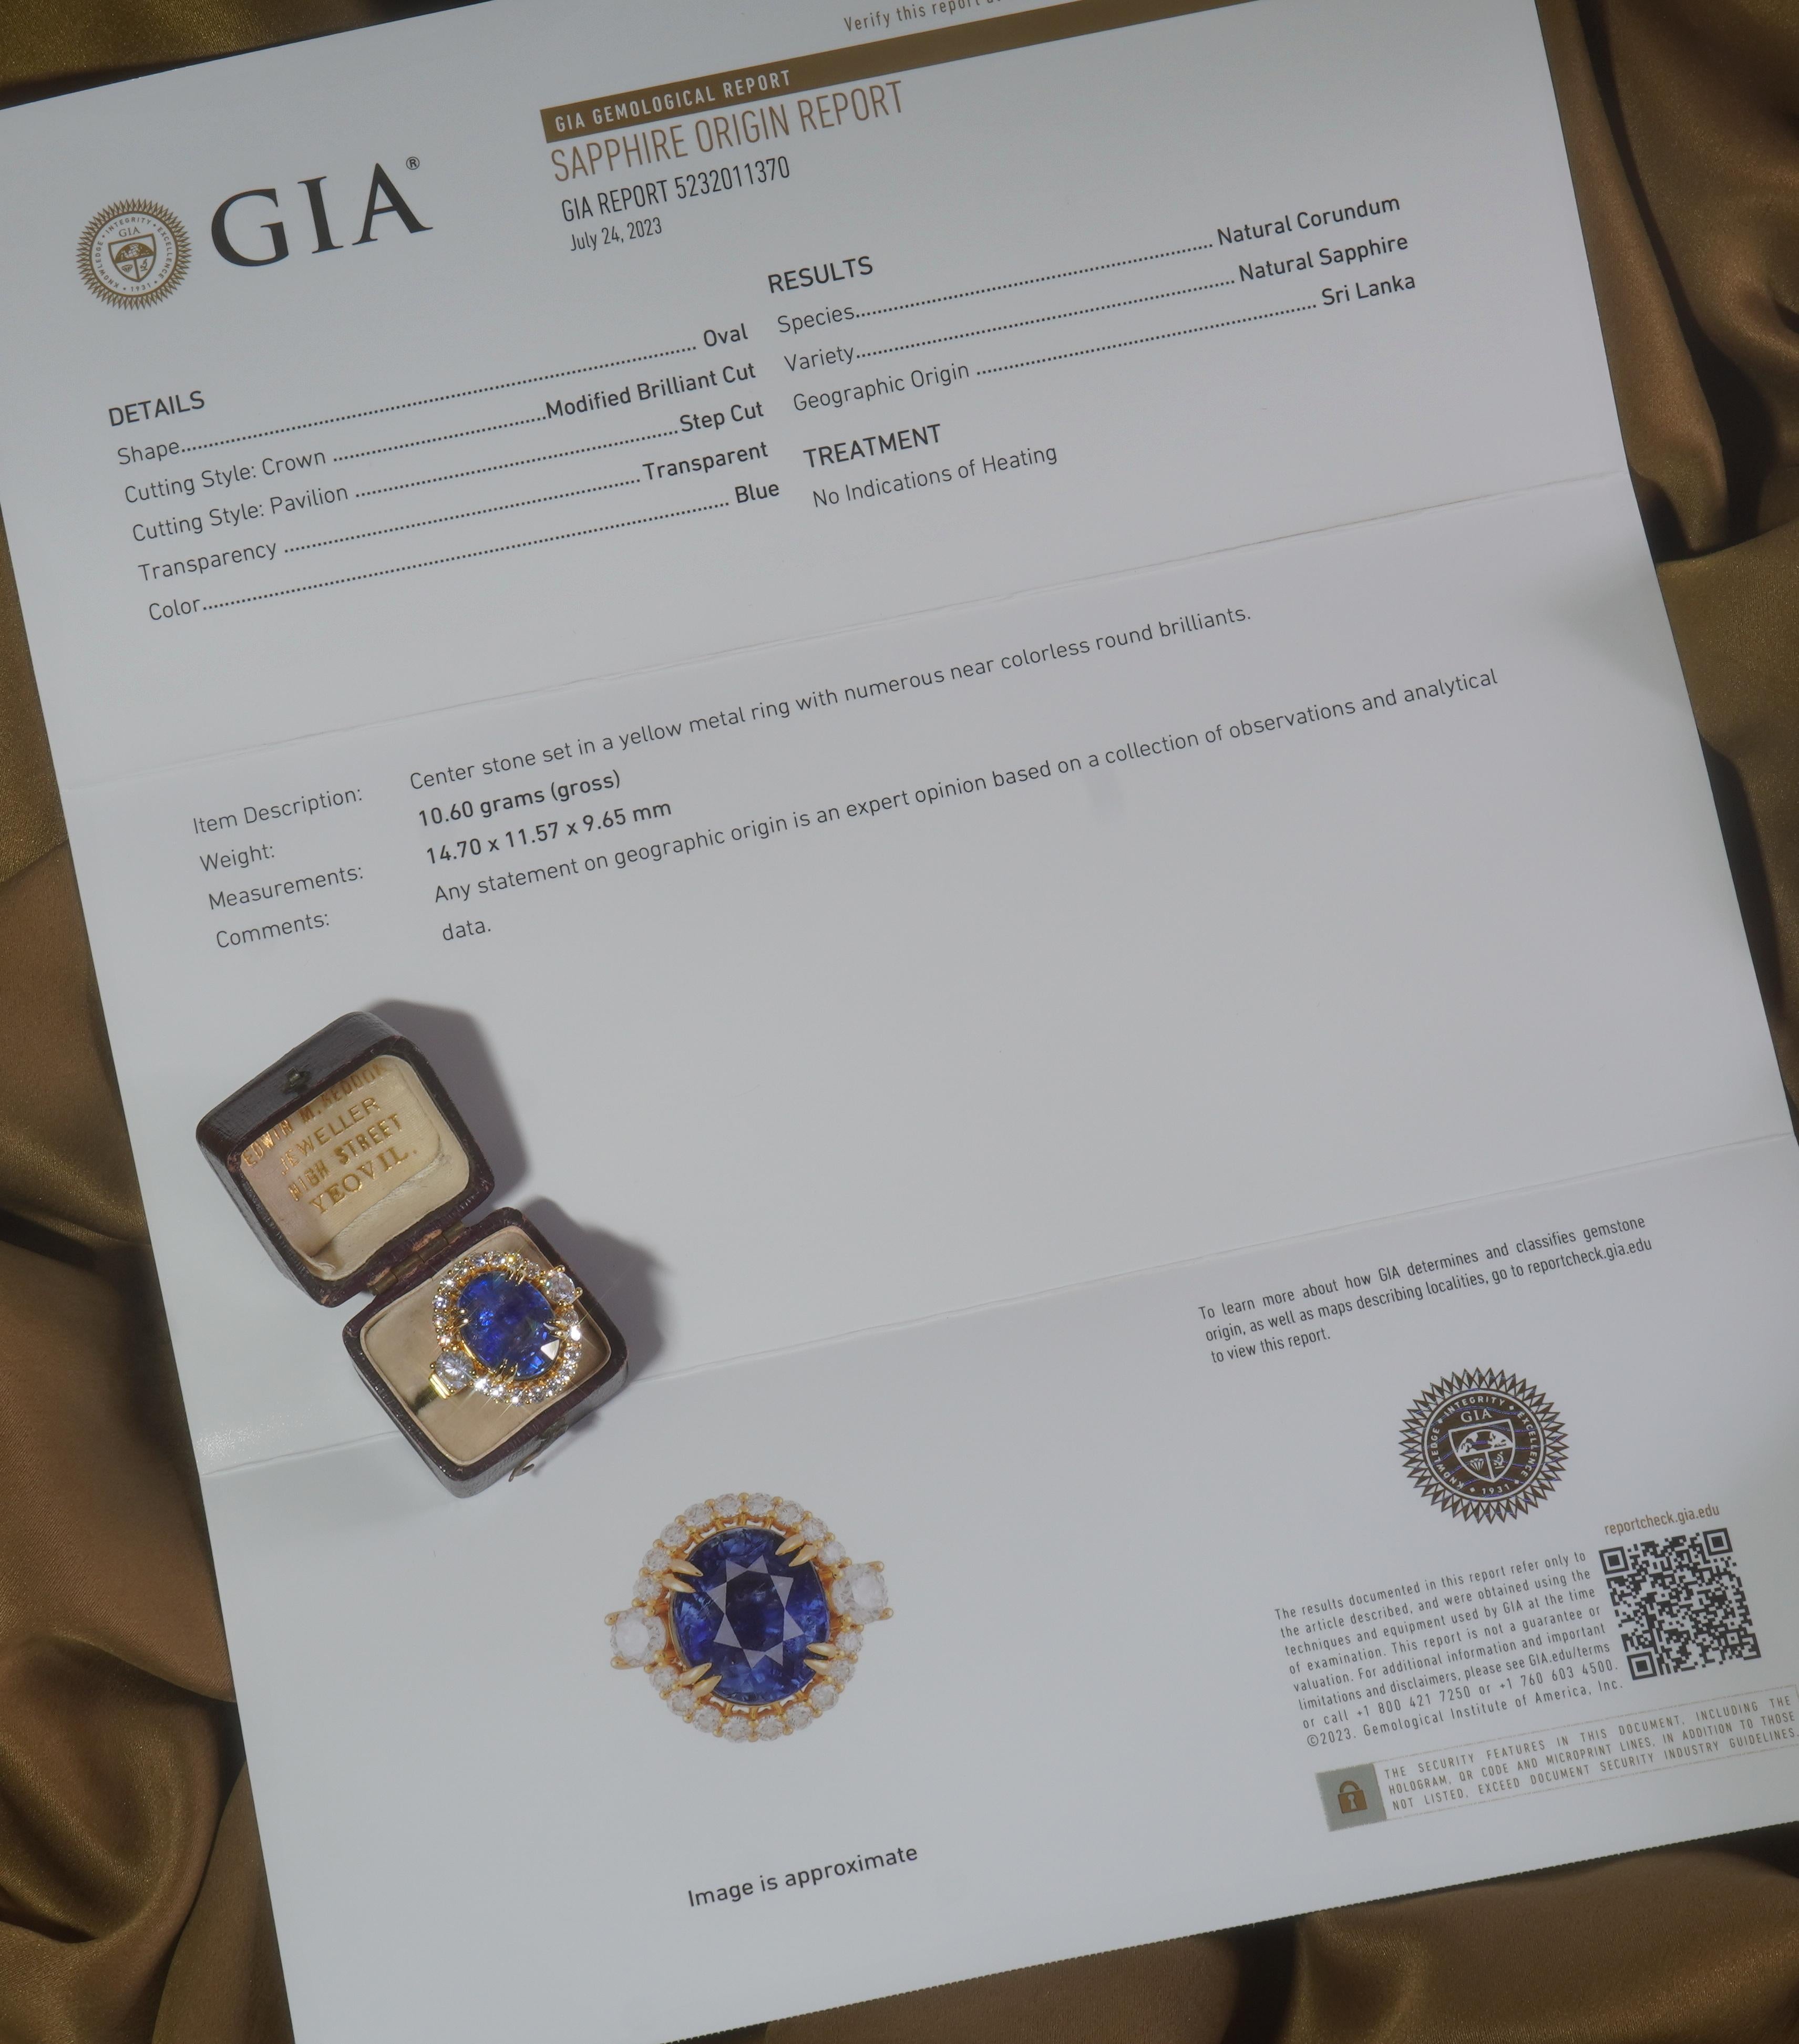 Old South Jewels proudly presents... VINTAGE LUXURY.   GIA CERTIFIED 18K HUGE 17.52 CARATS UNHEATED SAPPHIRE DIAMOND ANTIQUE RING & BOX!   HUGE 15.34 CARAT BRILLIANT ROYAL BLUE GIA CERTIFIED RARE NO HEAT NATURAL SAPPHIRE.   This Gorgeous Sapphire Is